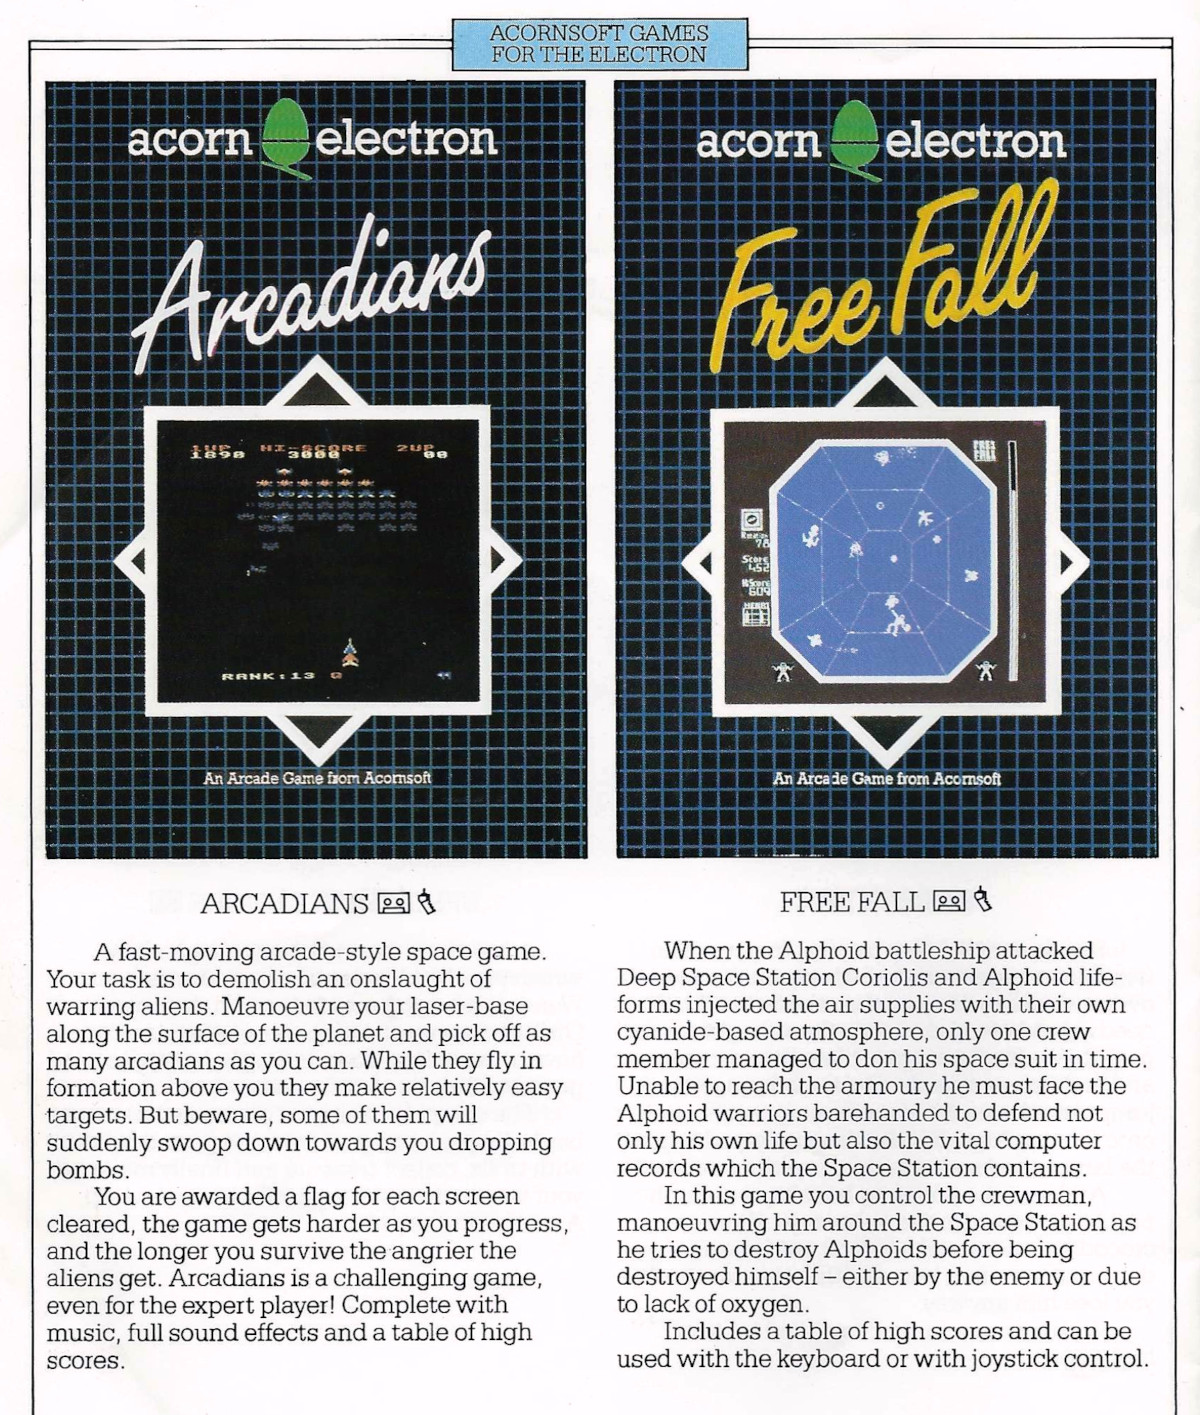 Part of a sales brochure for Acornsoft showing Freefall for the Acorn <span class='hilite'><span class='hilite'>Electron</span></span> - the 